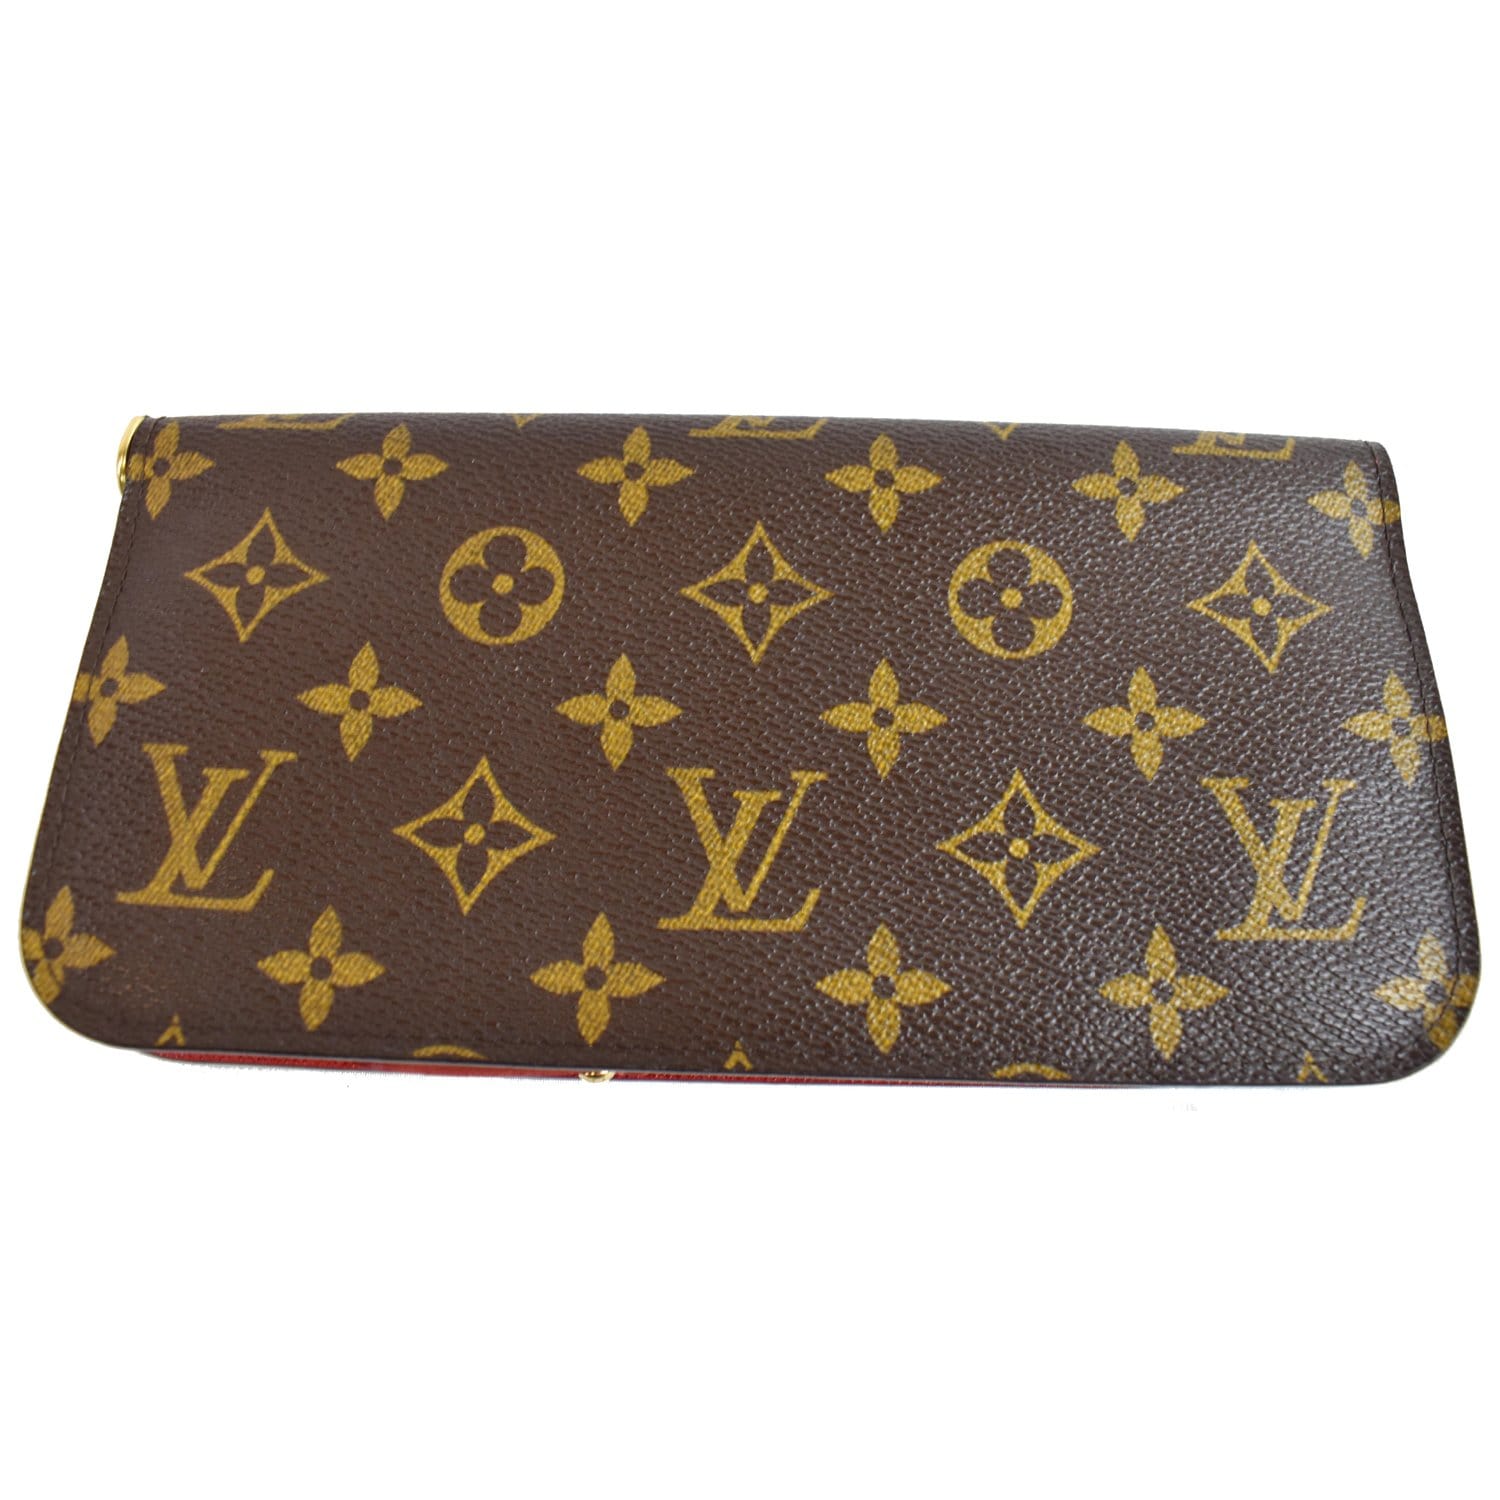 NWT Brown Leather Louis Vuitton Remarque LV Designer Inspired